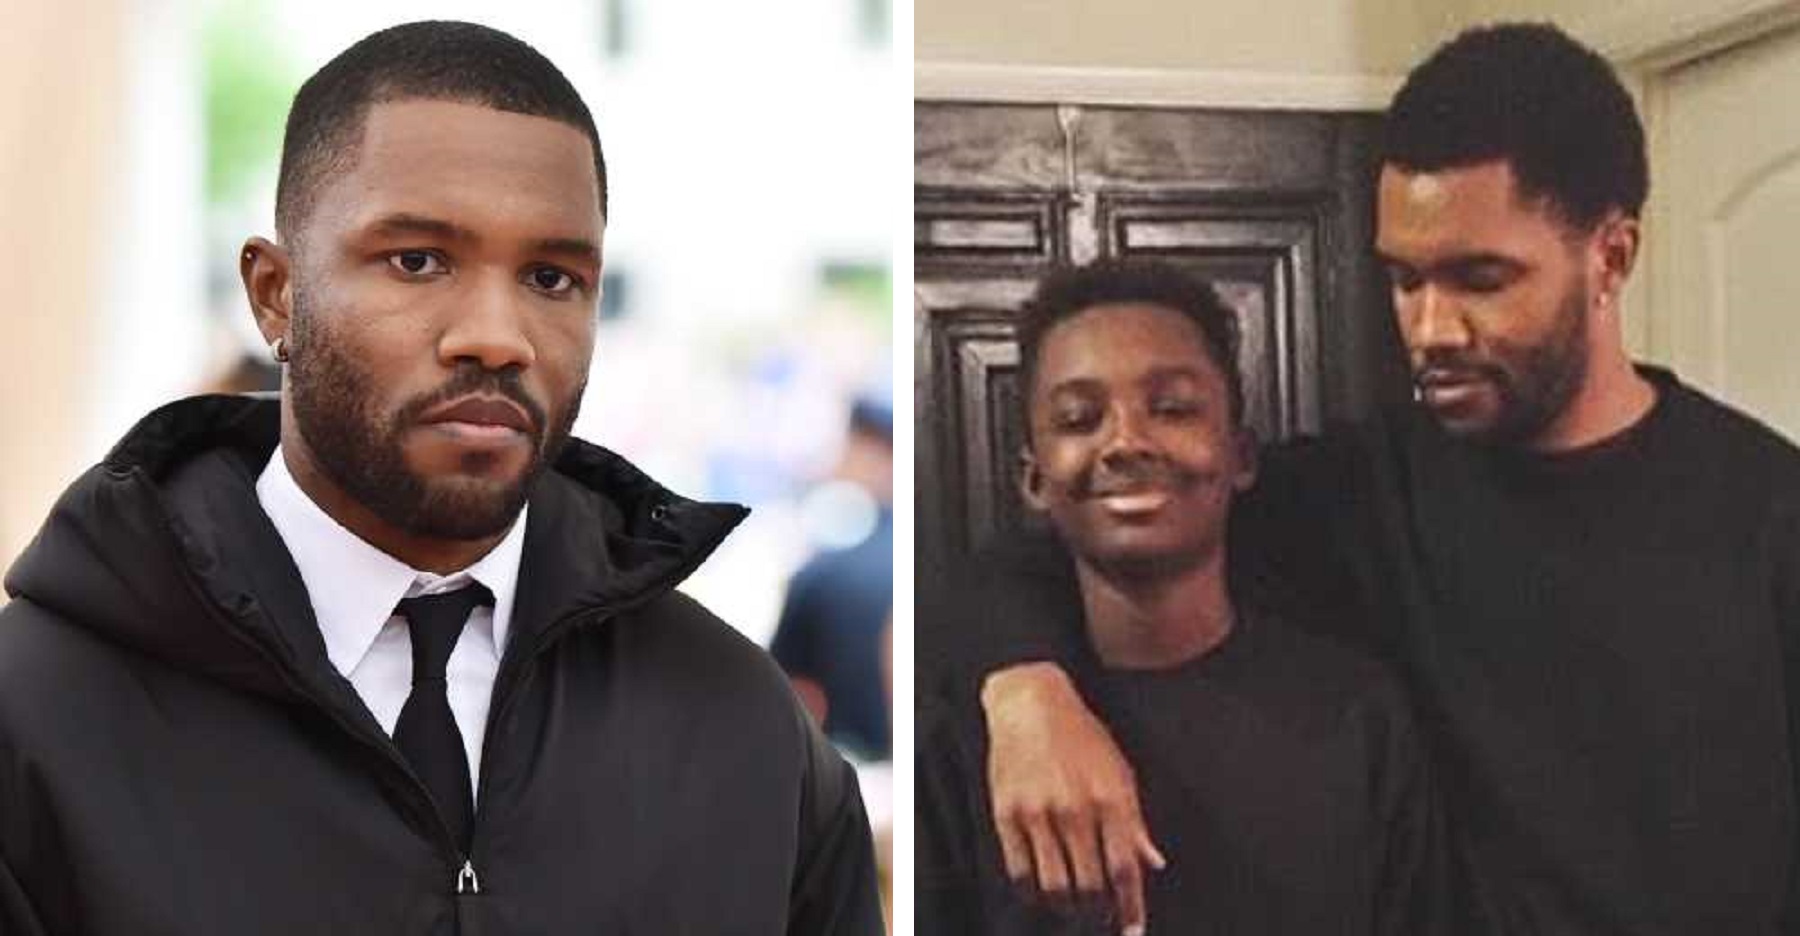 Frank Ocean’s Brother Has Reportedly Died in a Car Accident